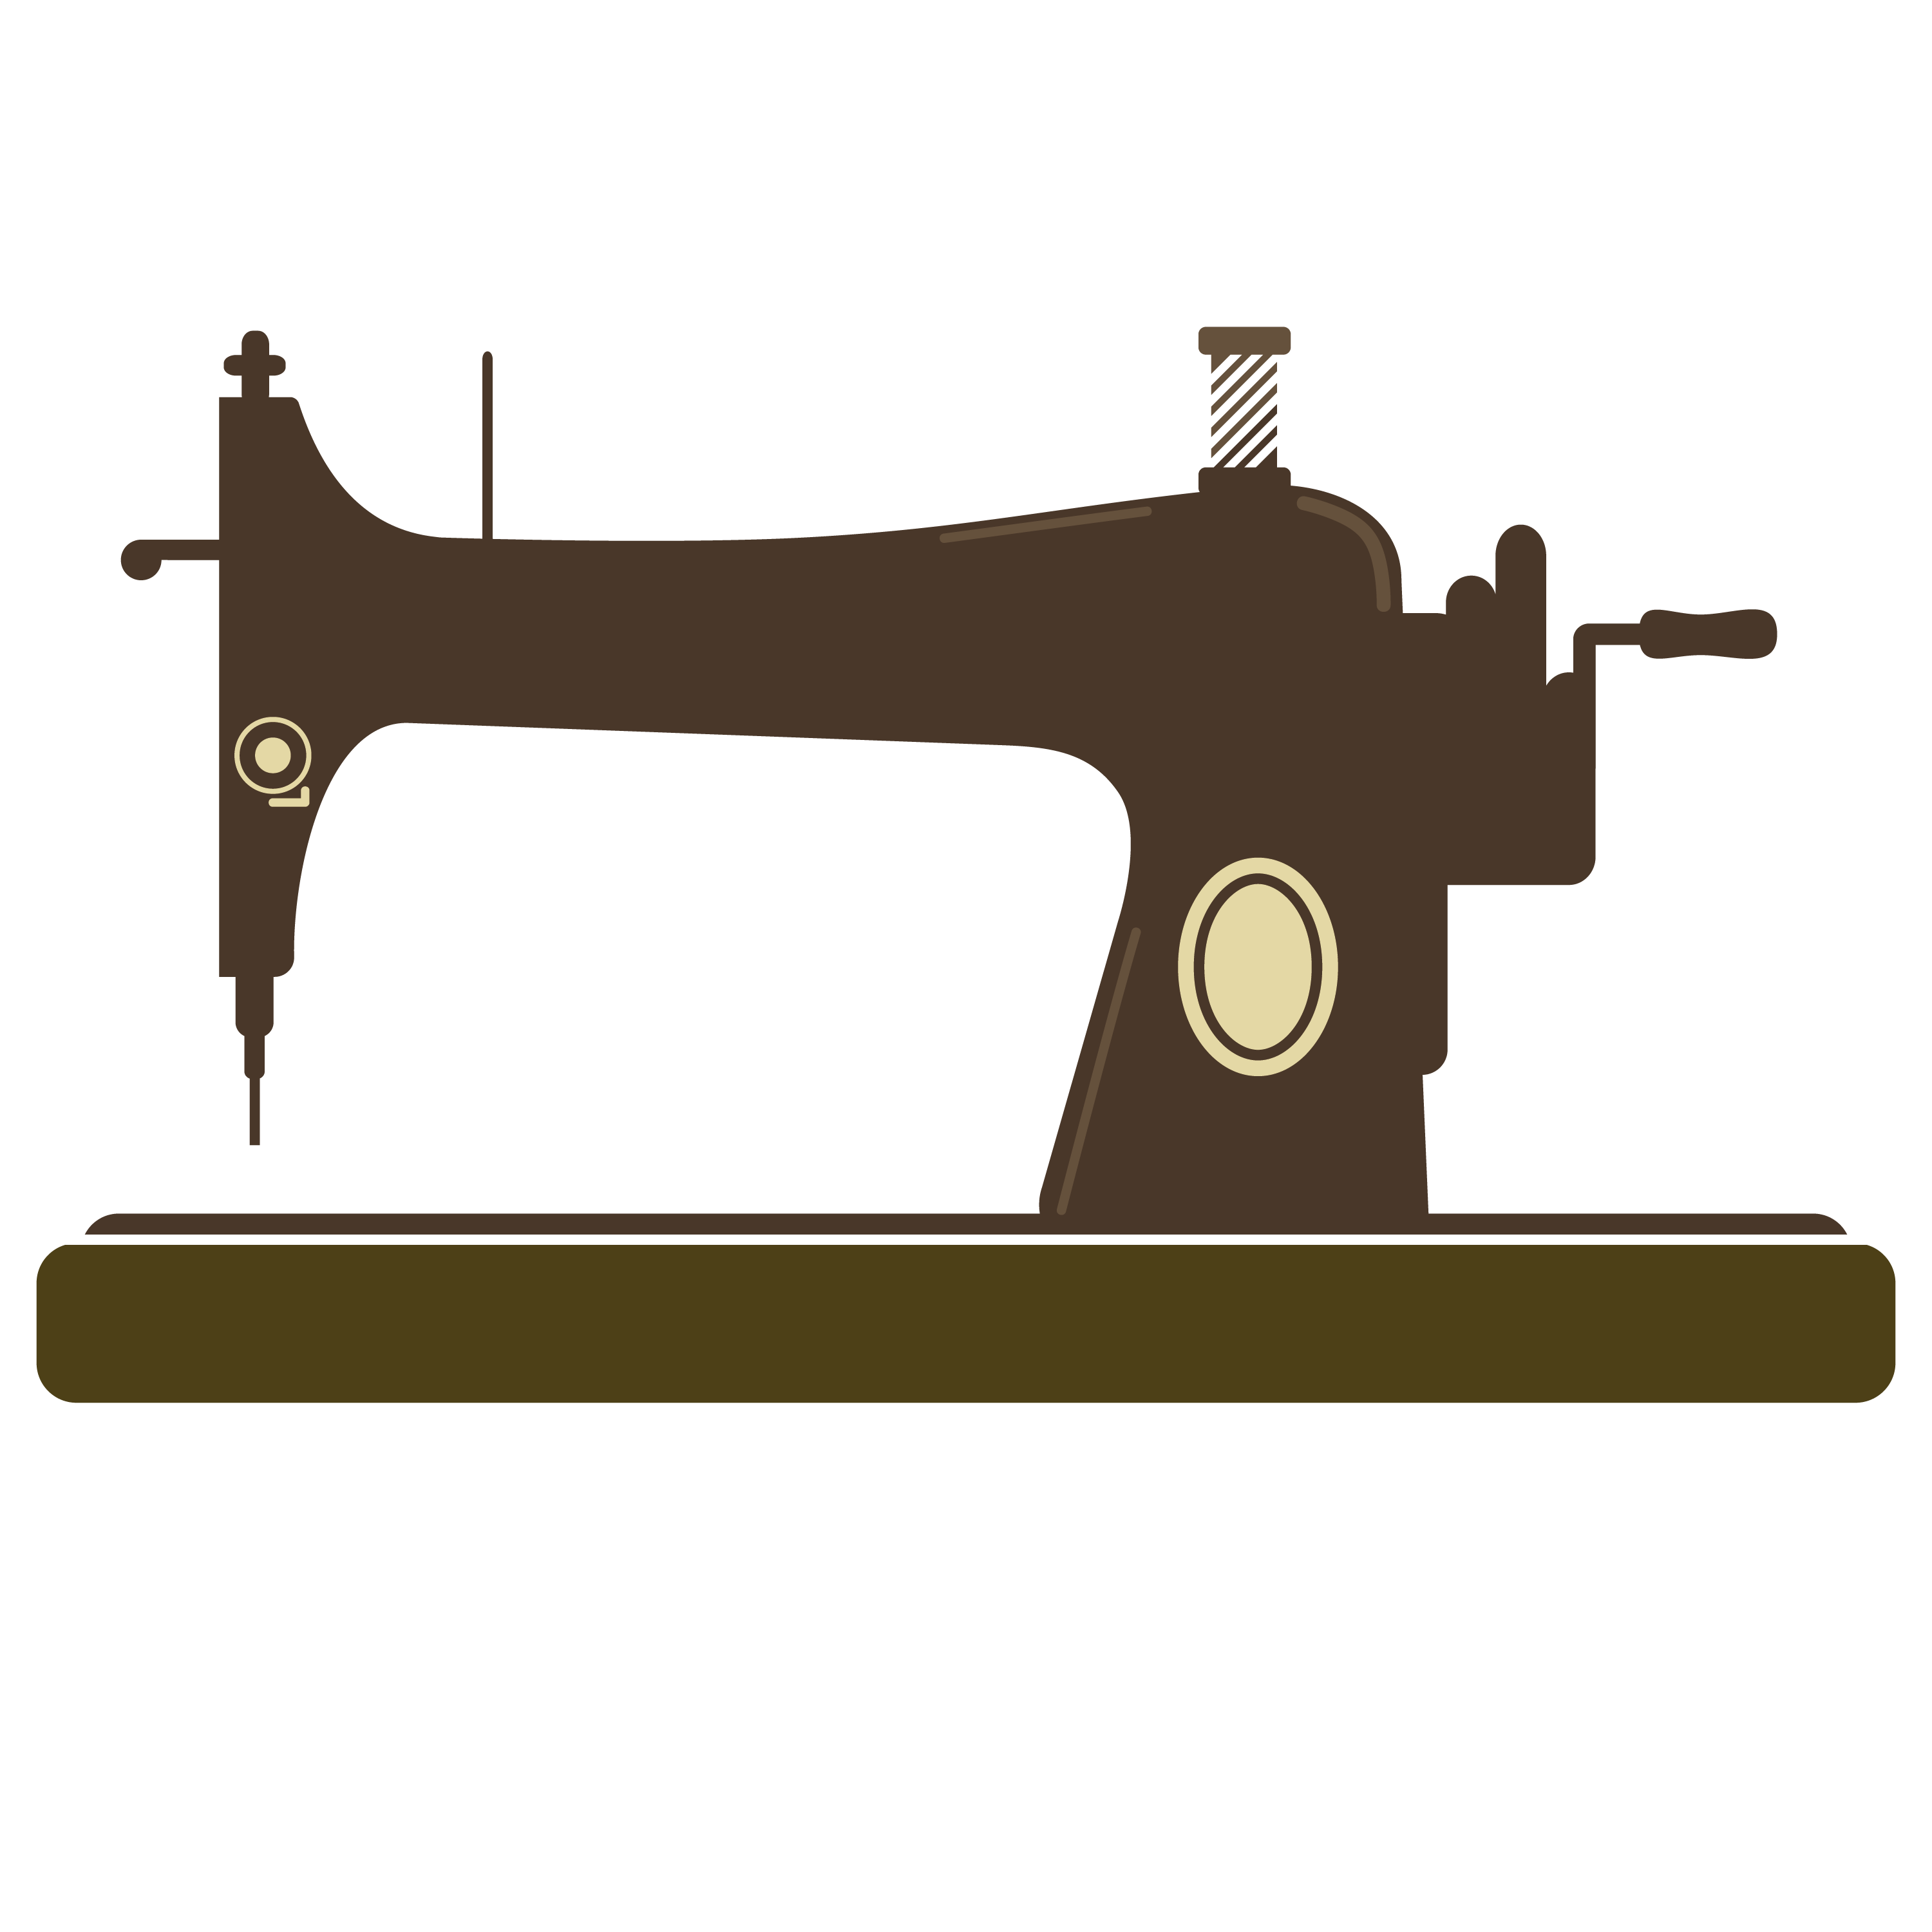 sewing clipart vector